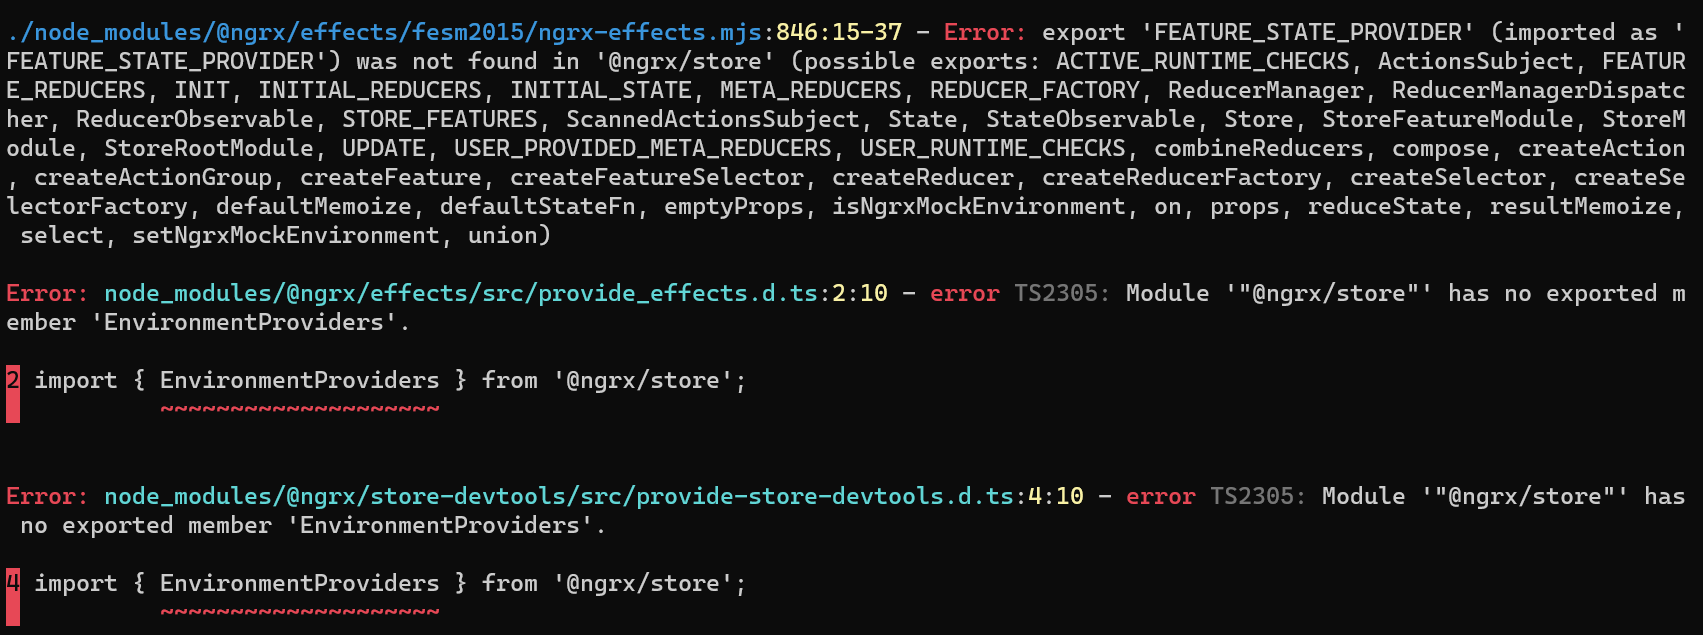 Angular运行错误：Module '"@ngrx/store"' has no exported member 'Environment Providers'.